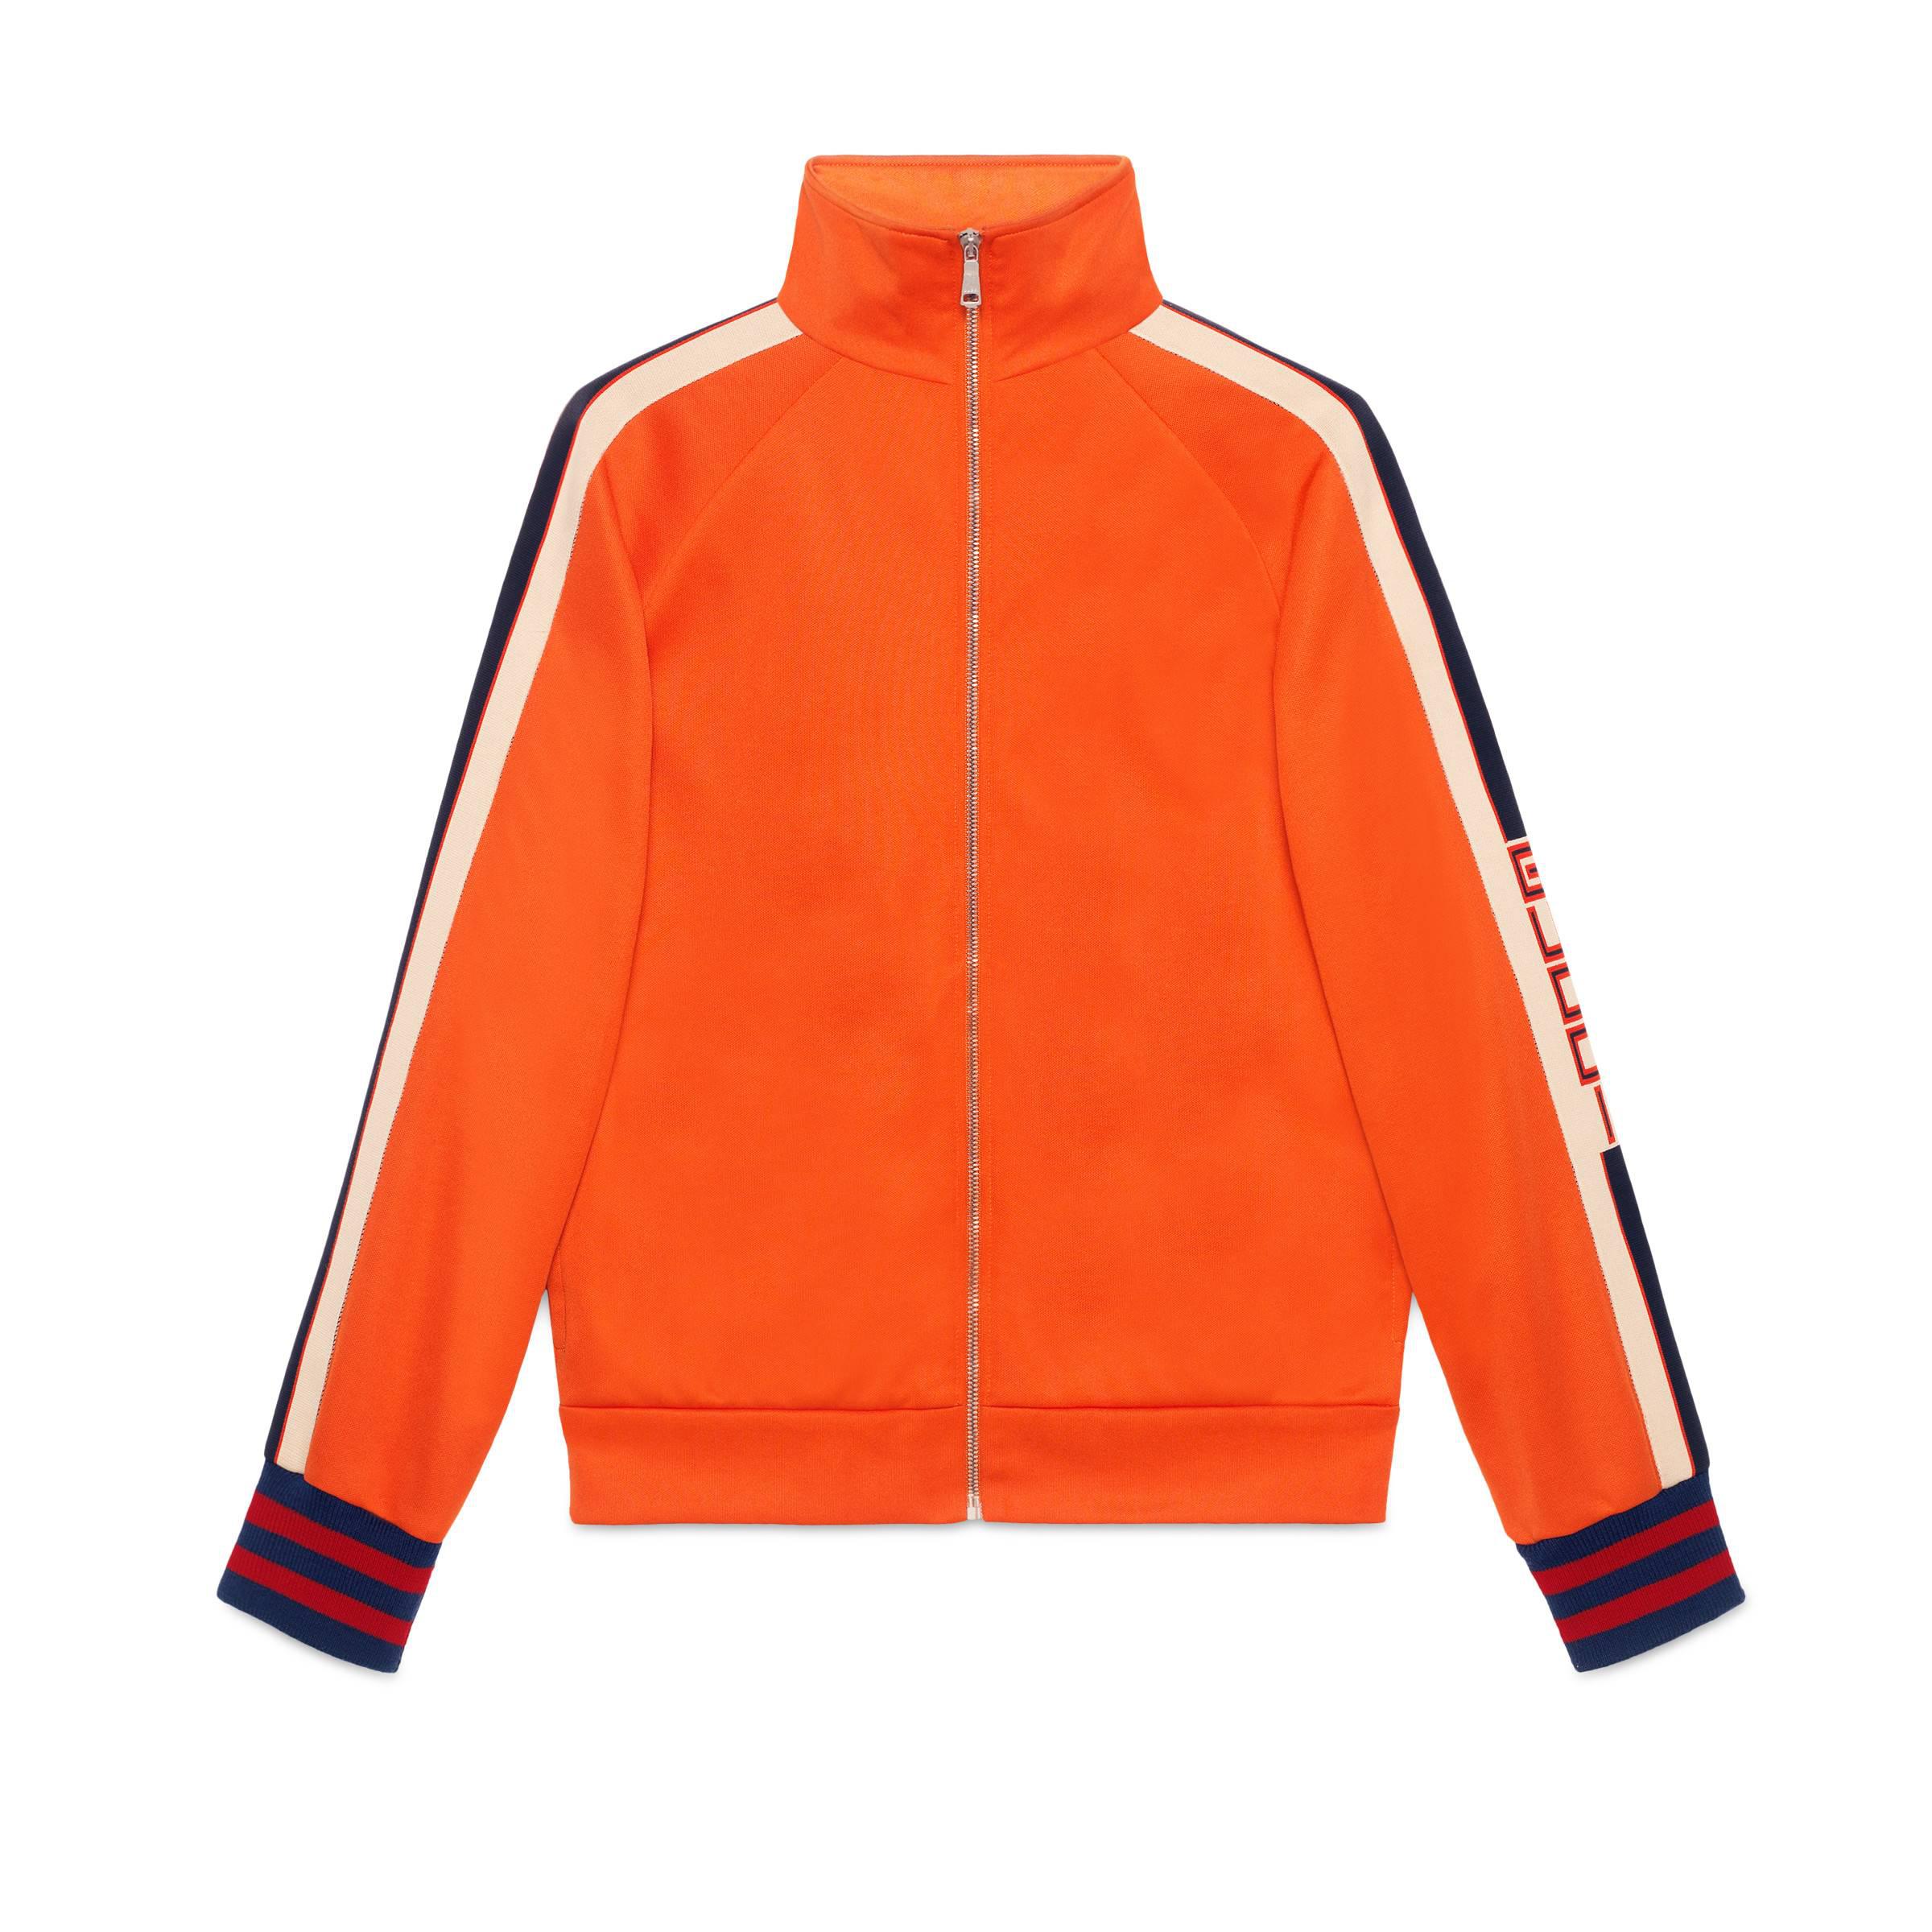 Gucci Technical Jersey Jacket in Orange for Men - Save 16. ...